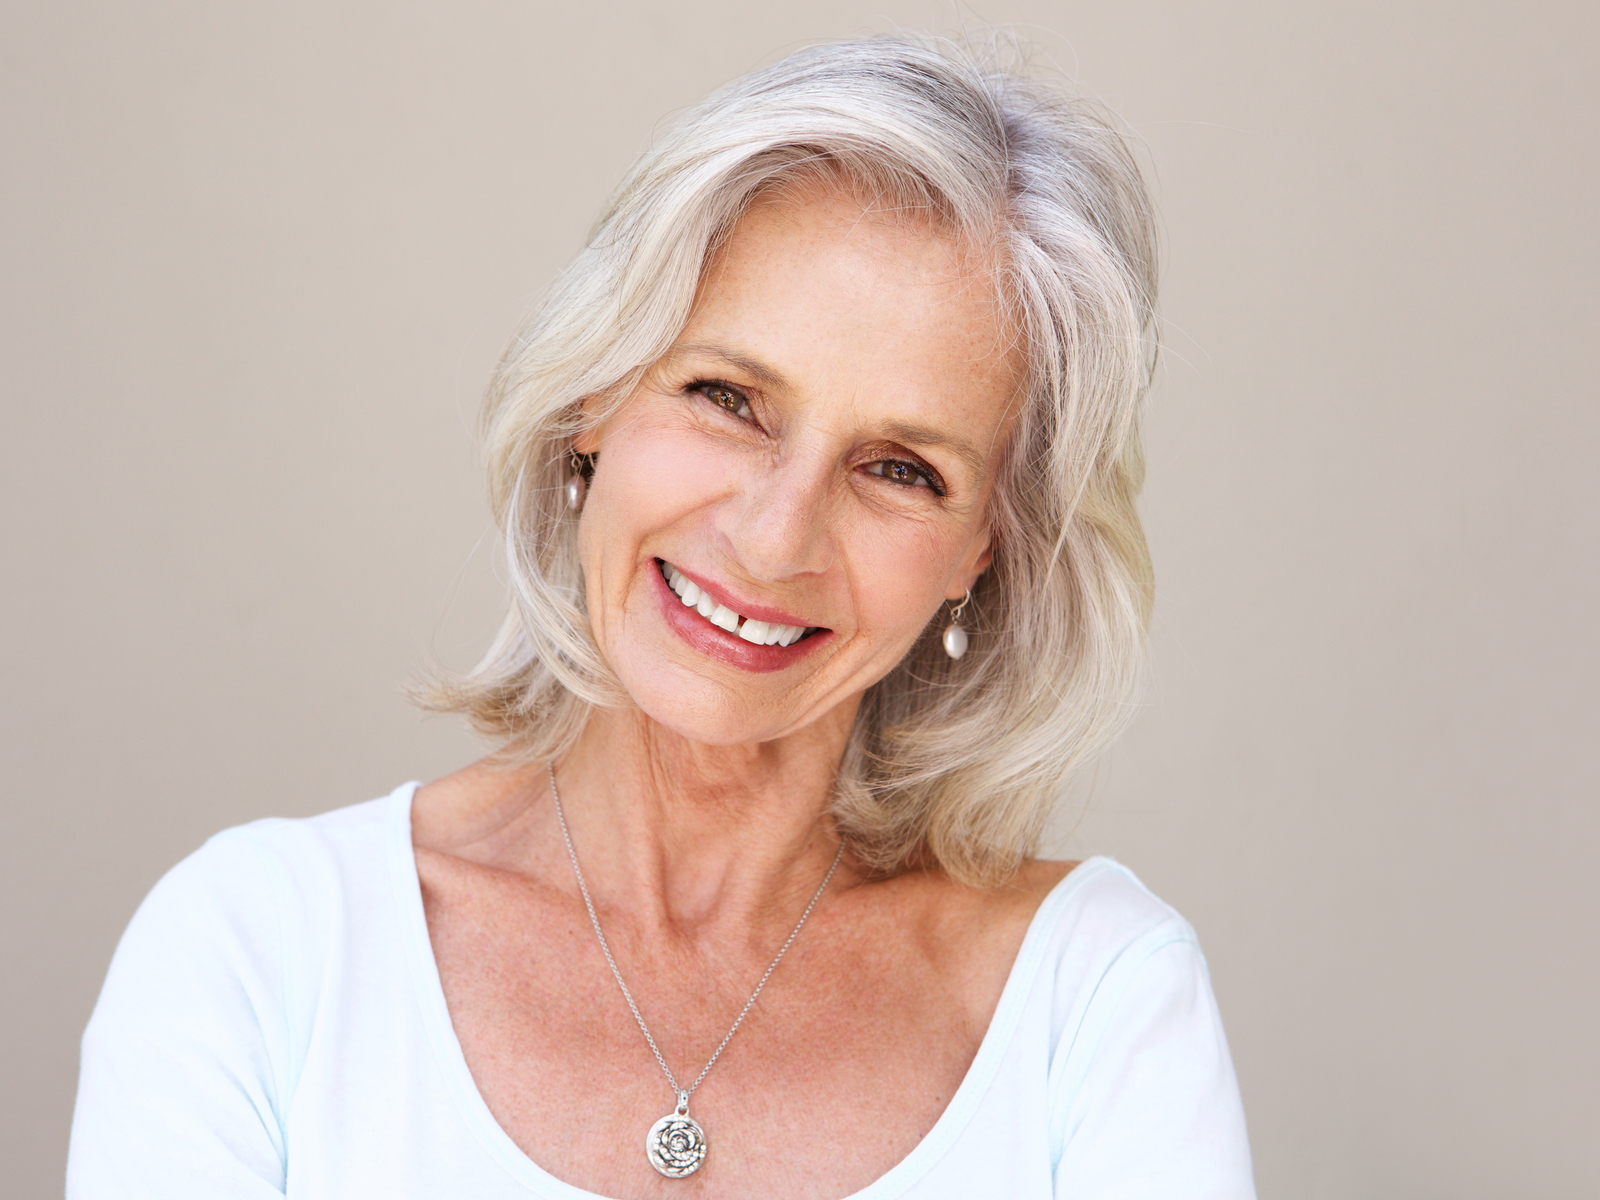 Voluminous Body Wave Lob, a great hairstyle for women over 70